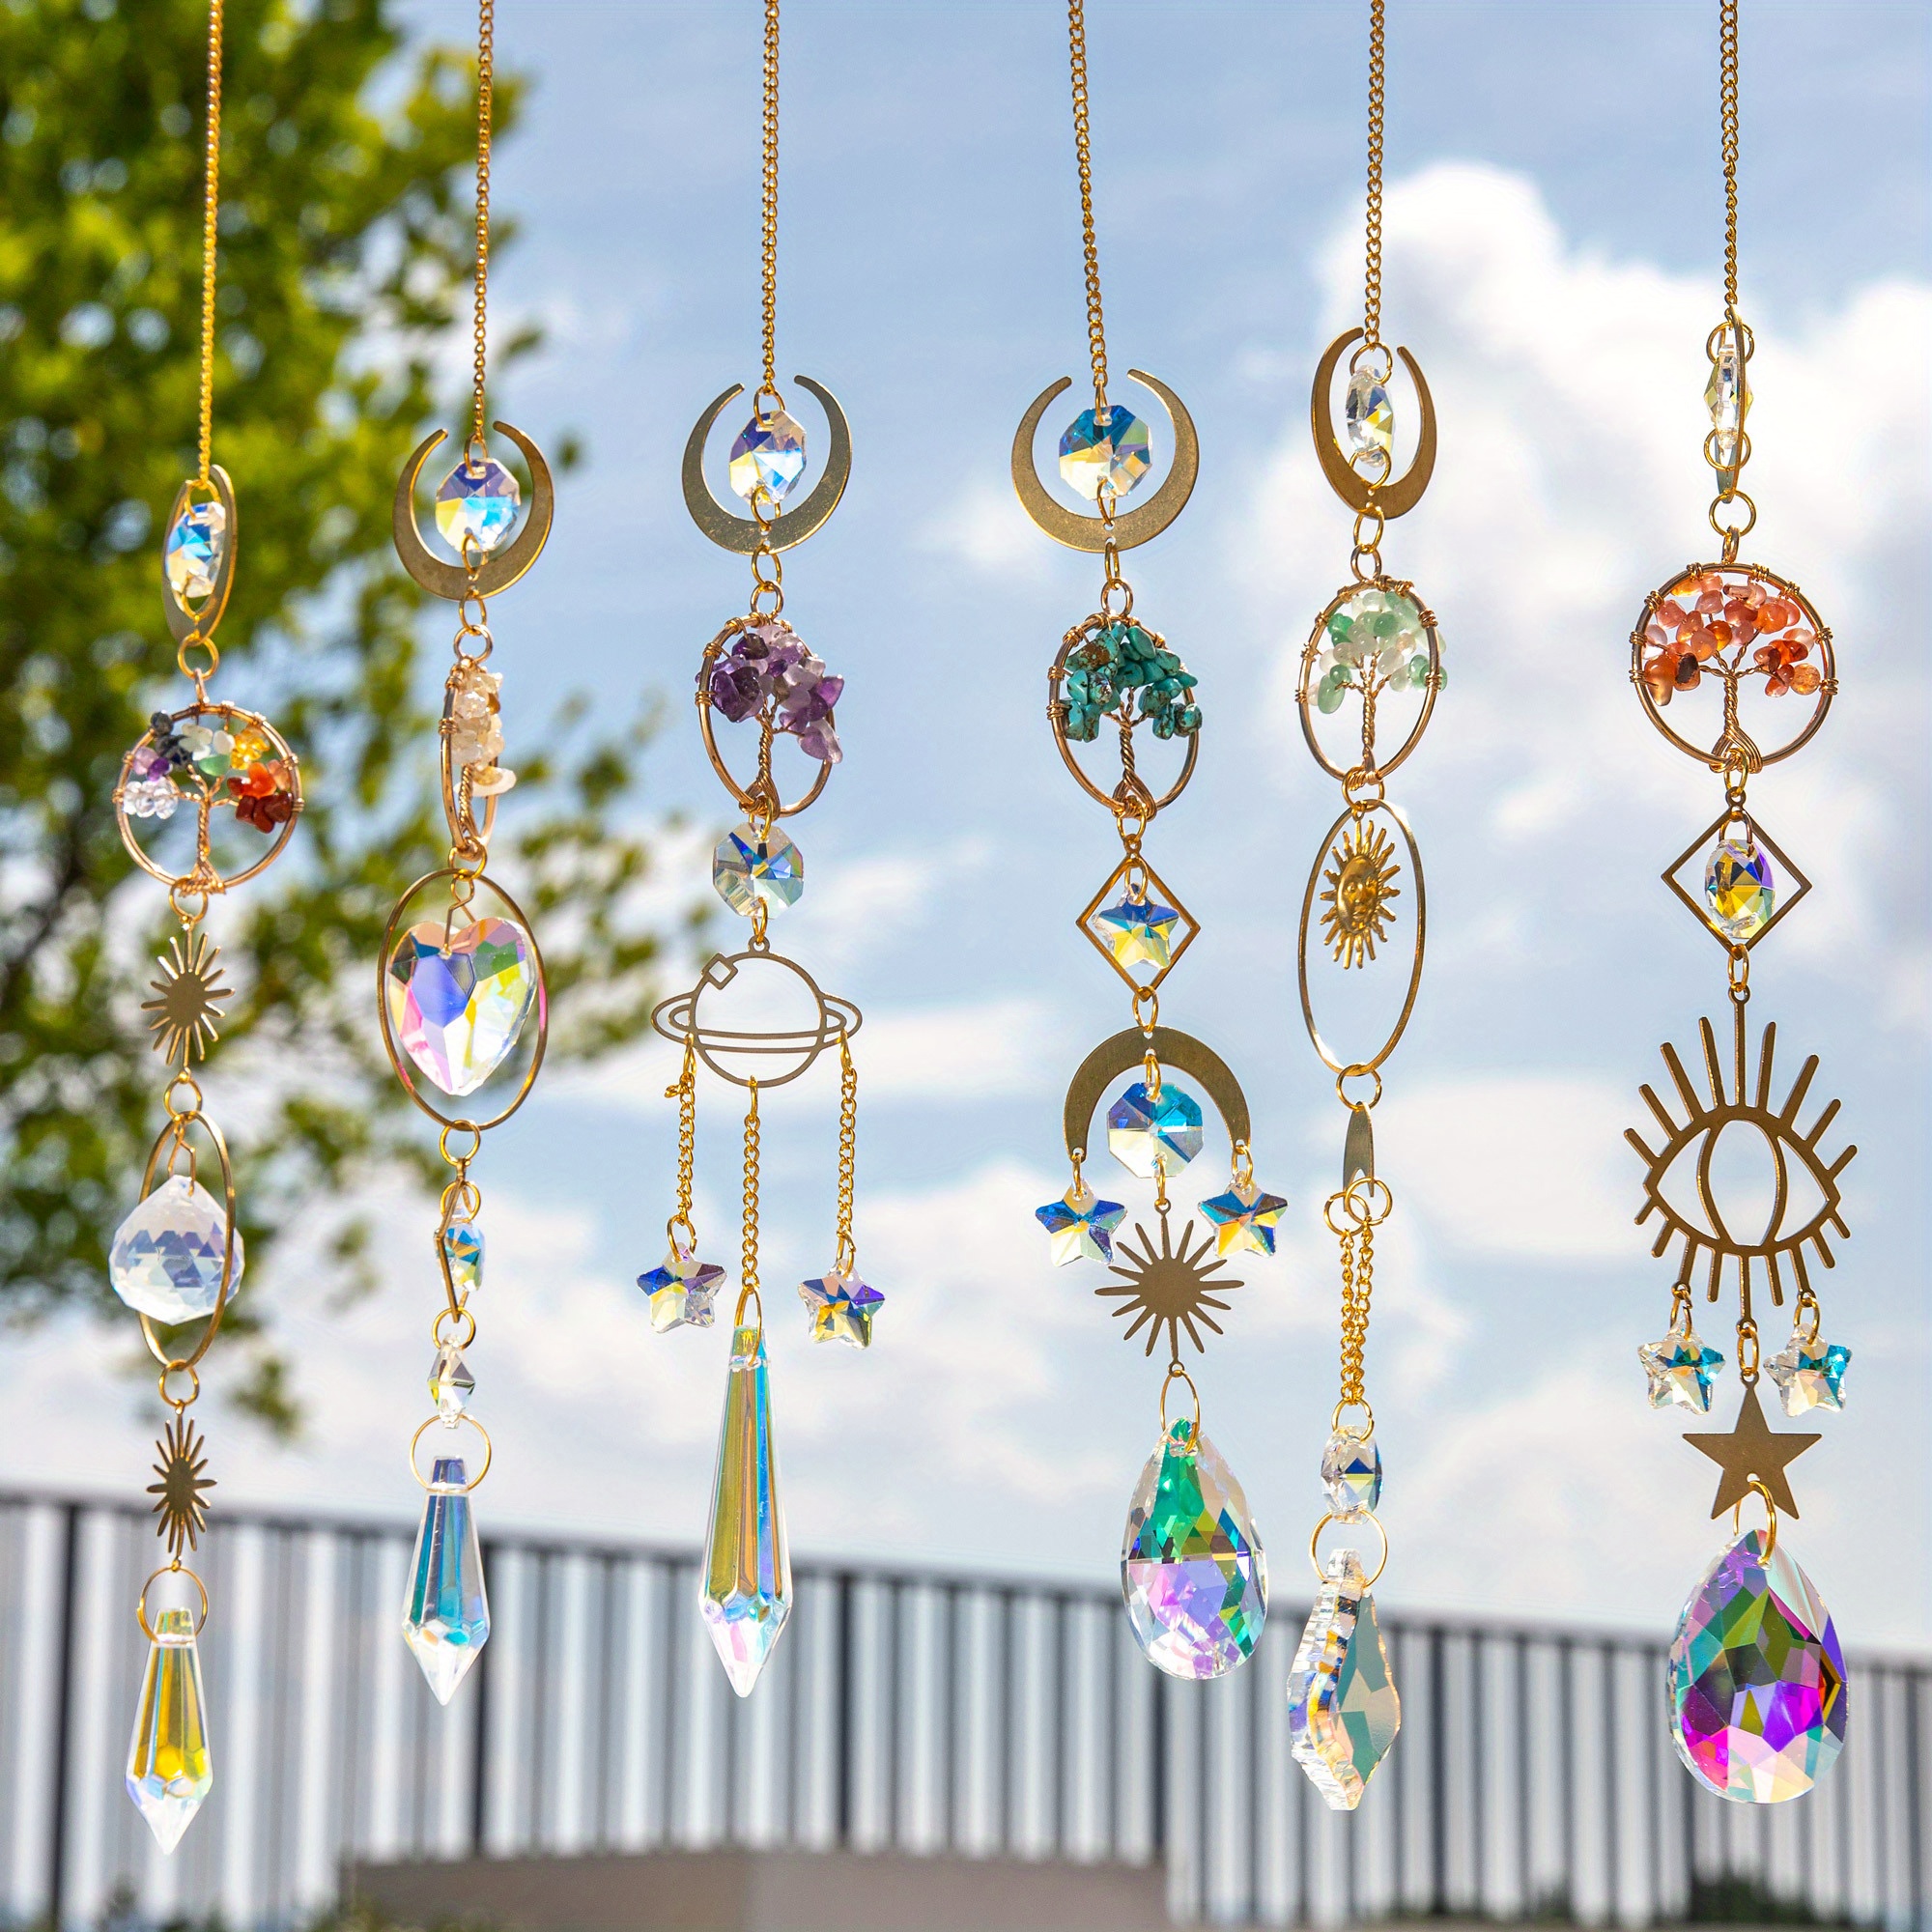 Rosleanny Crystal Garden Suncatcher Hanging Crystals Ornament for Window Rainbow Maker Prisms Home Decor Gift Boxed Sun Catcher